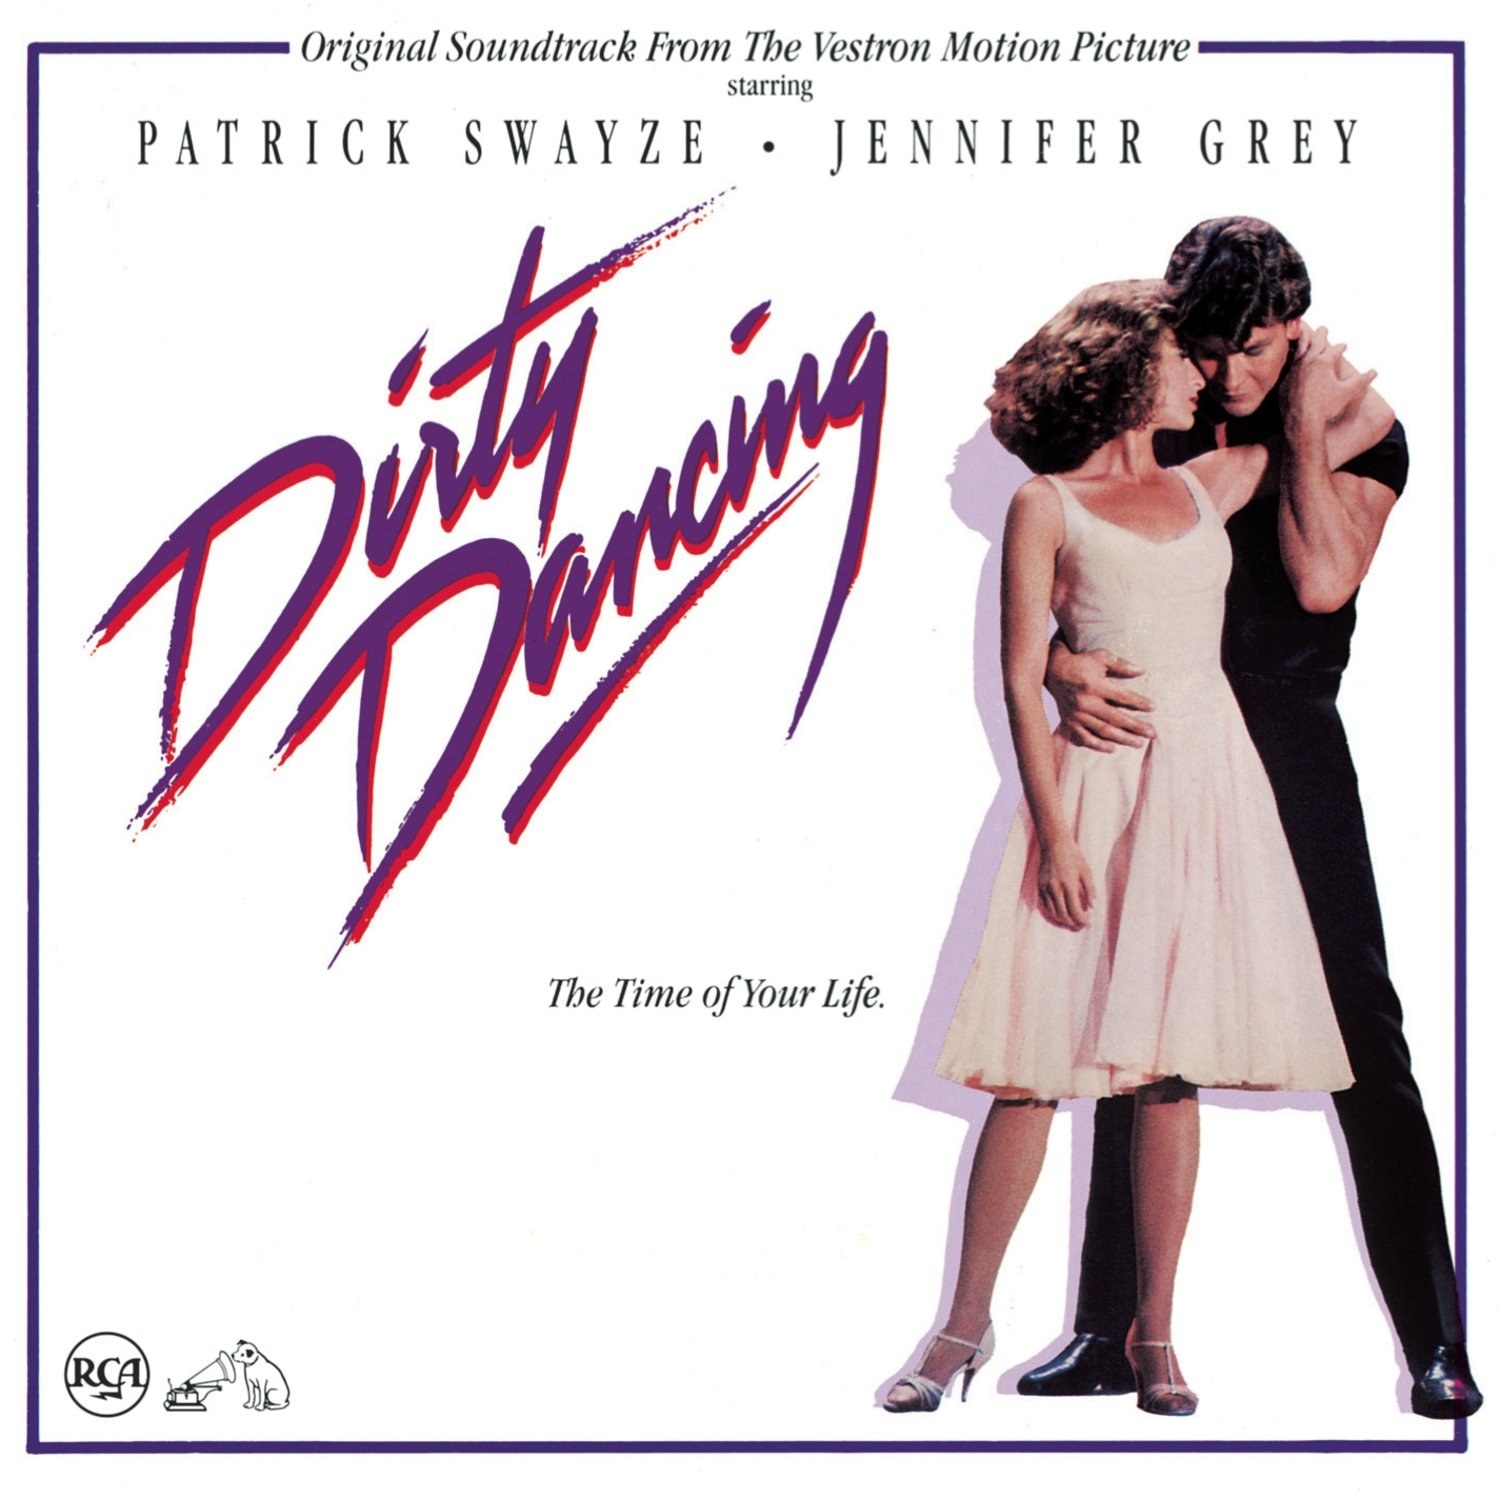 The album cover for Dirty Dancing